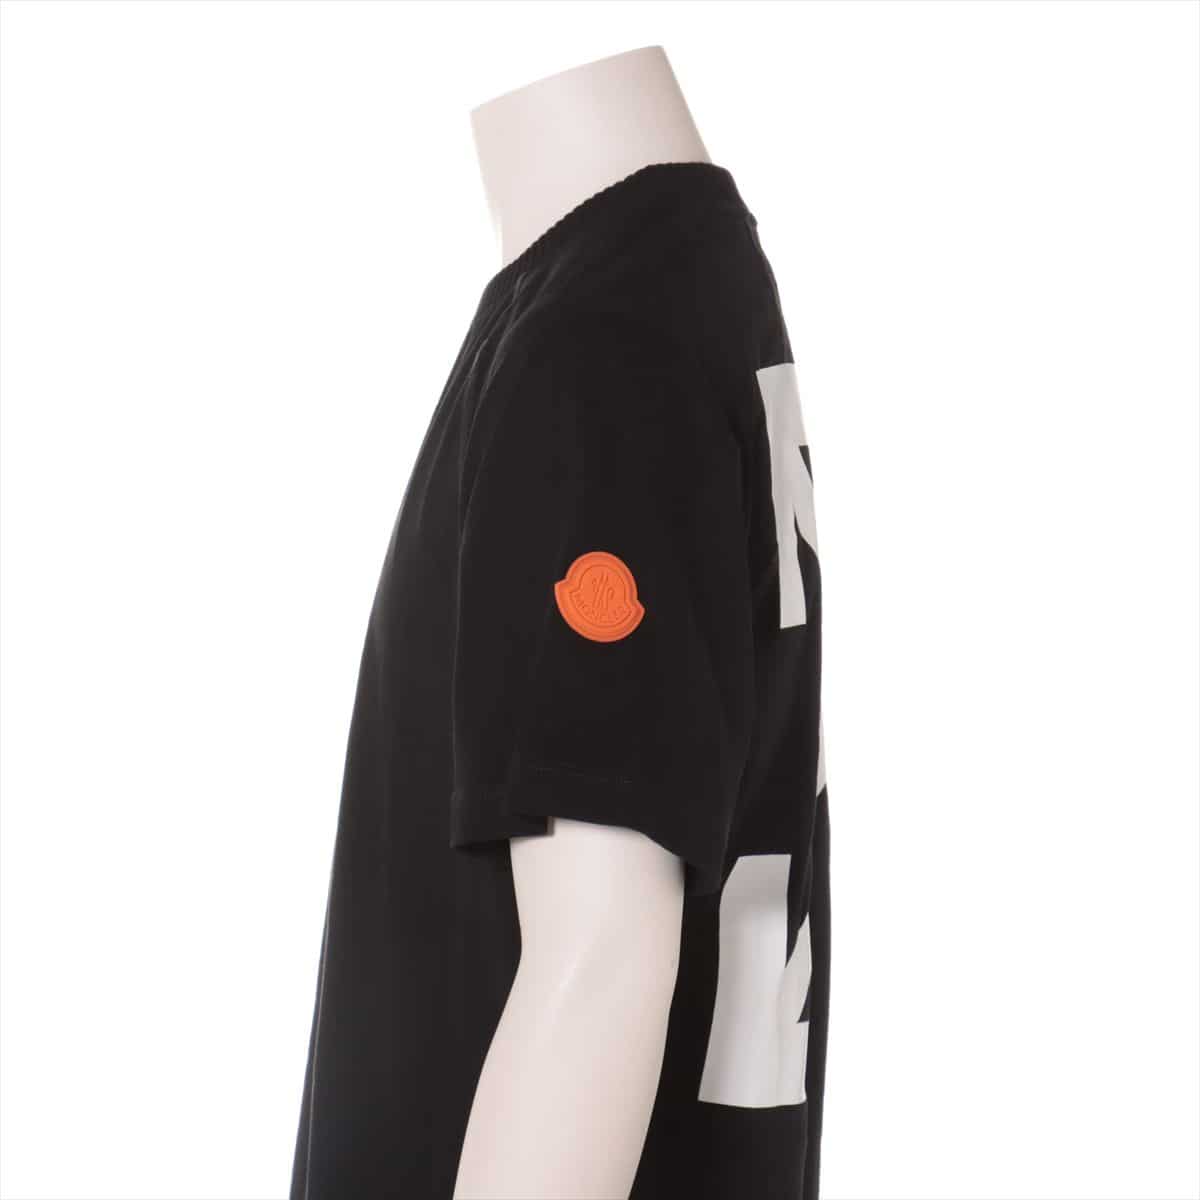 Moncler x Offwhite 16 years Cotton T-shirt S Men's Black  Back arrow arm with rubber logo patch